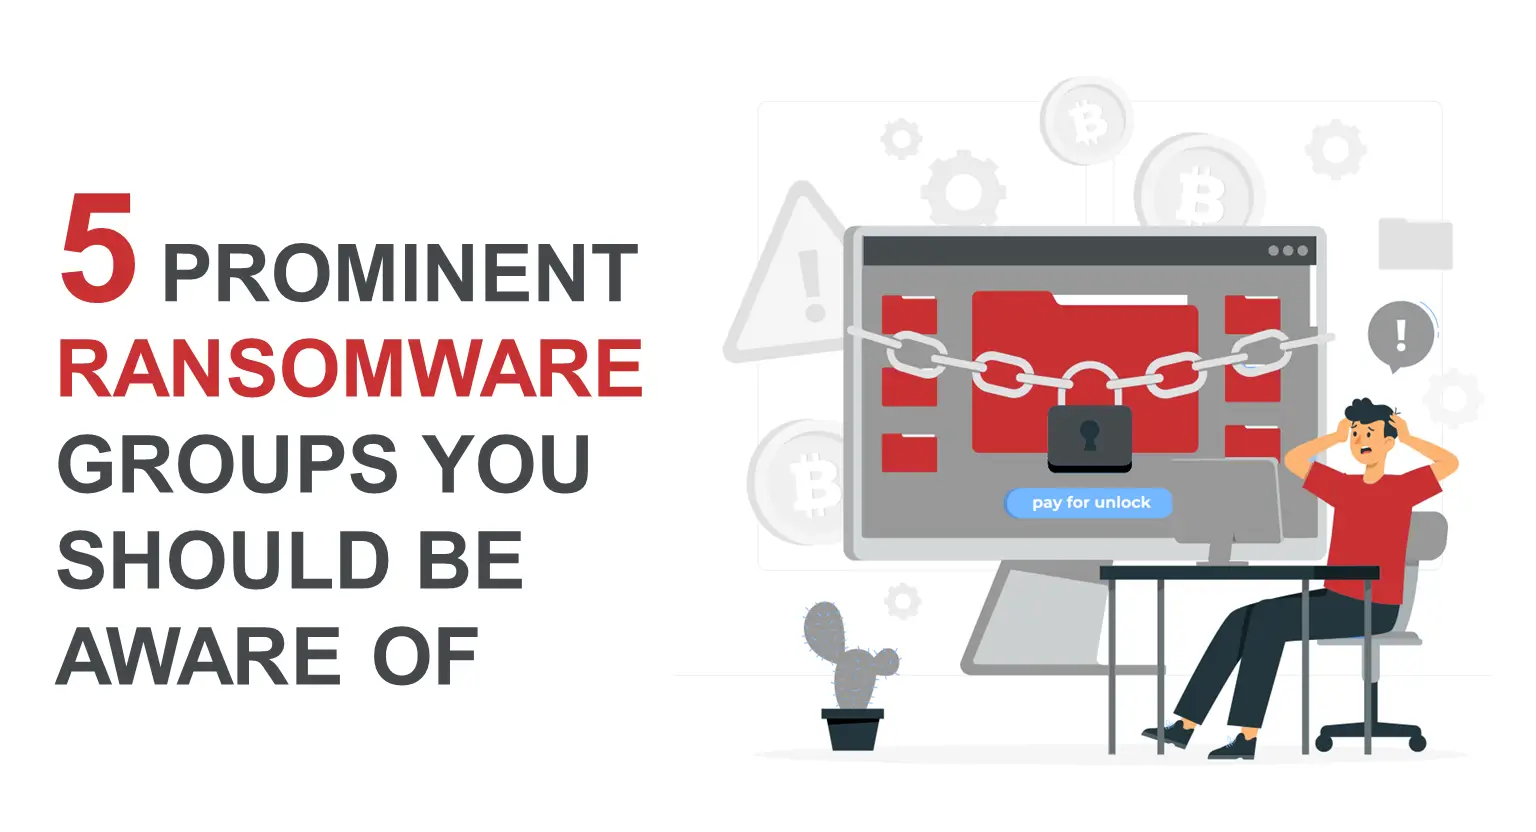 5 Prominent Ransomware Groups You Should Be Aware Of